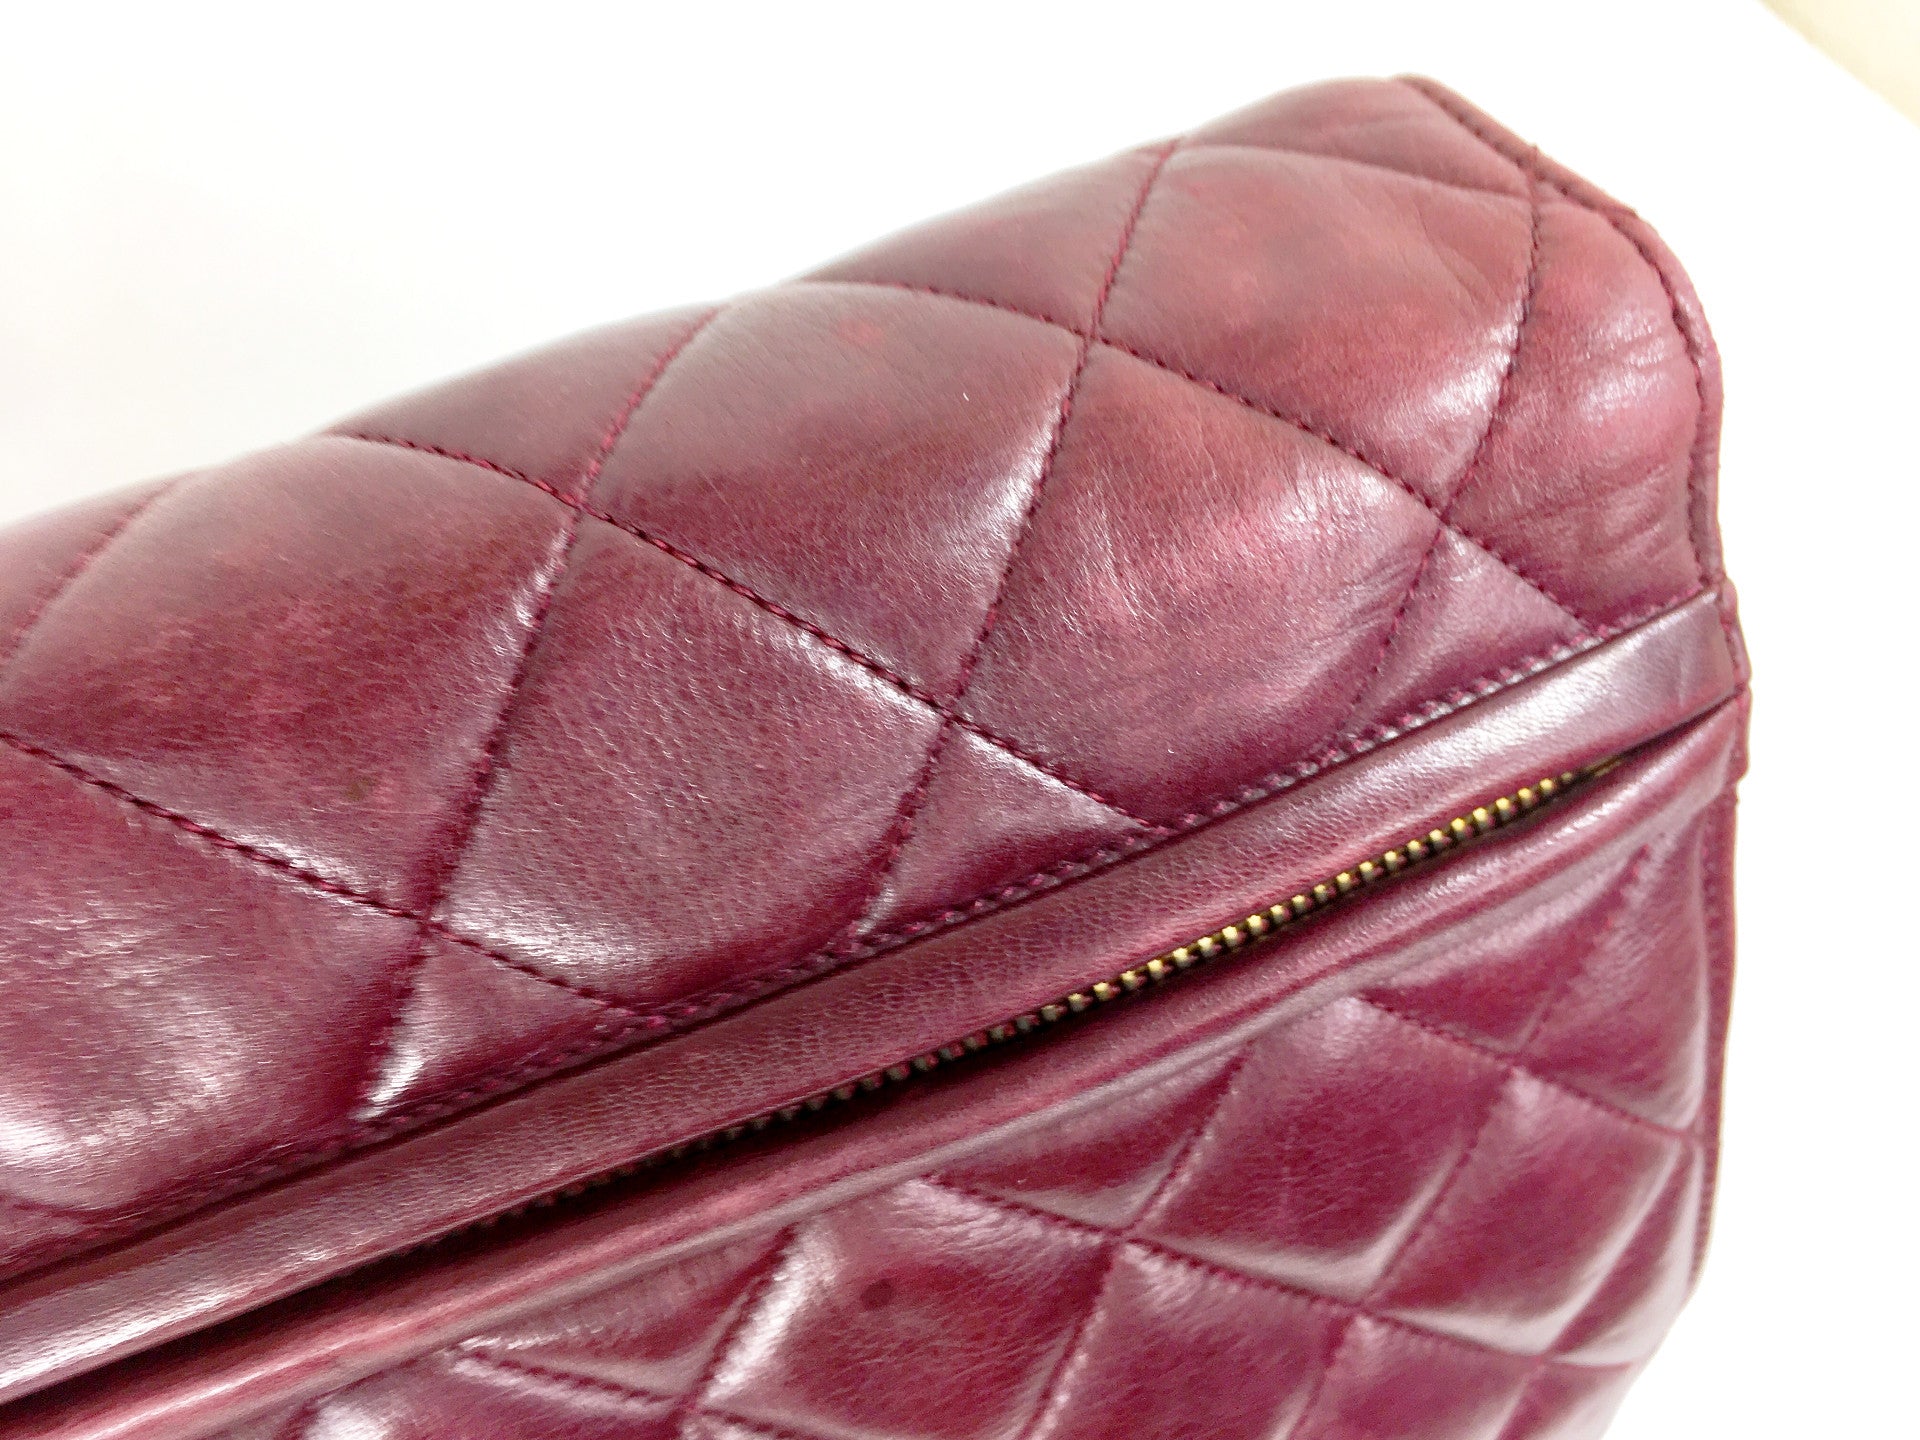 Chanel Jumbo Quilted Attache Business Kelly Briefcase 1ck1219 Burgundy  Suede Laptop Bag, Chanel